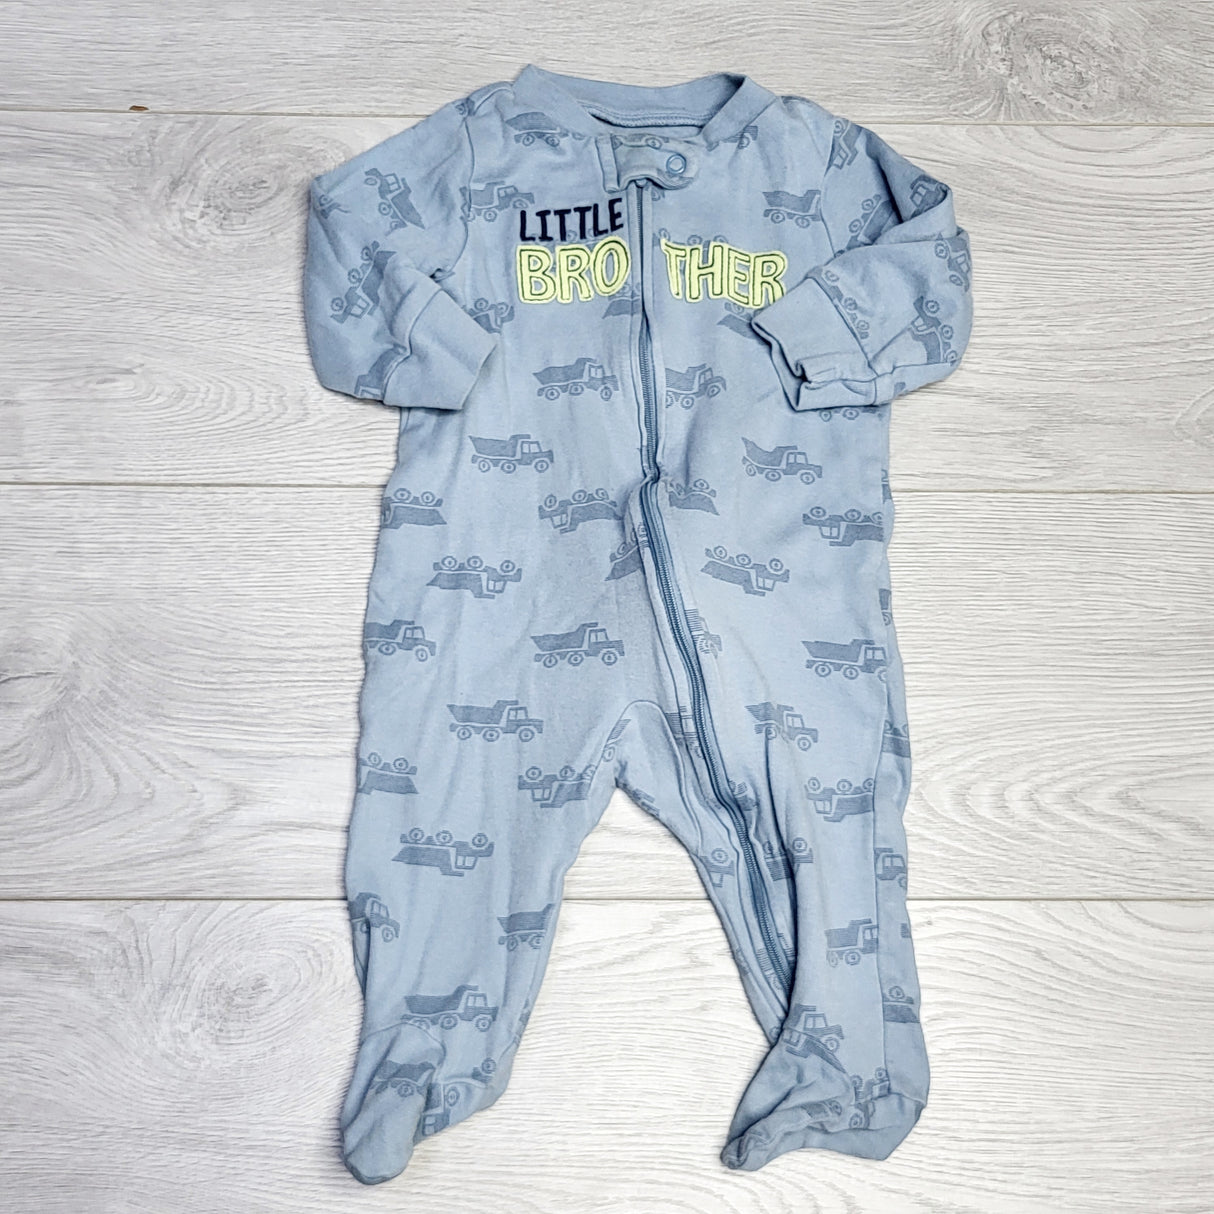 CRTH1 - Child of Mine blue zippered cotton "Little Brother" sleeper. Size 3-6 months